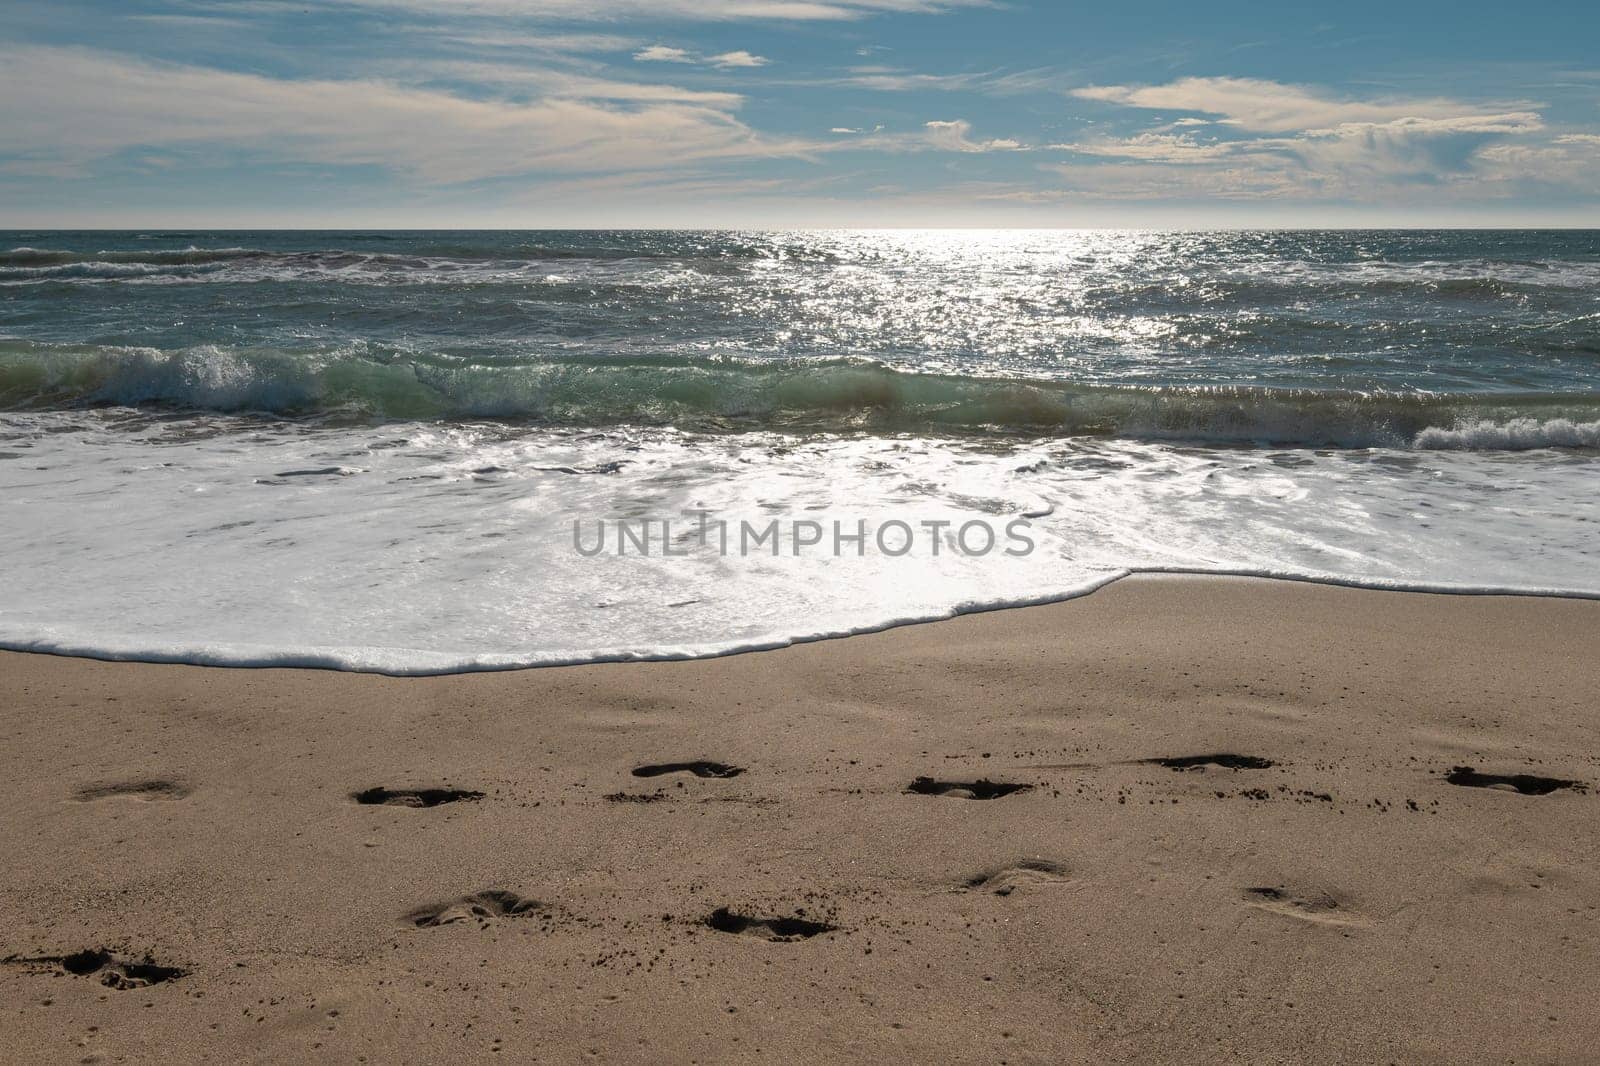 Sandy beach with human footprints leading to the sea, highlighted by the sparkling sunlight on the water.